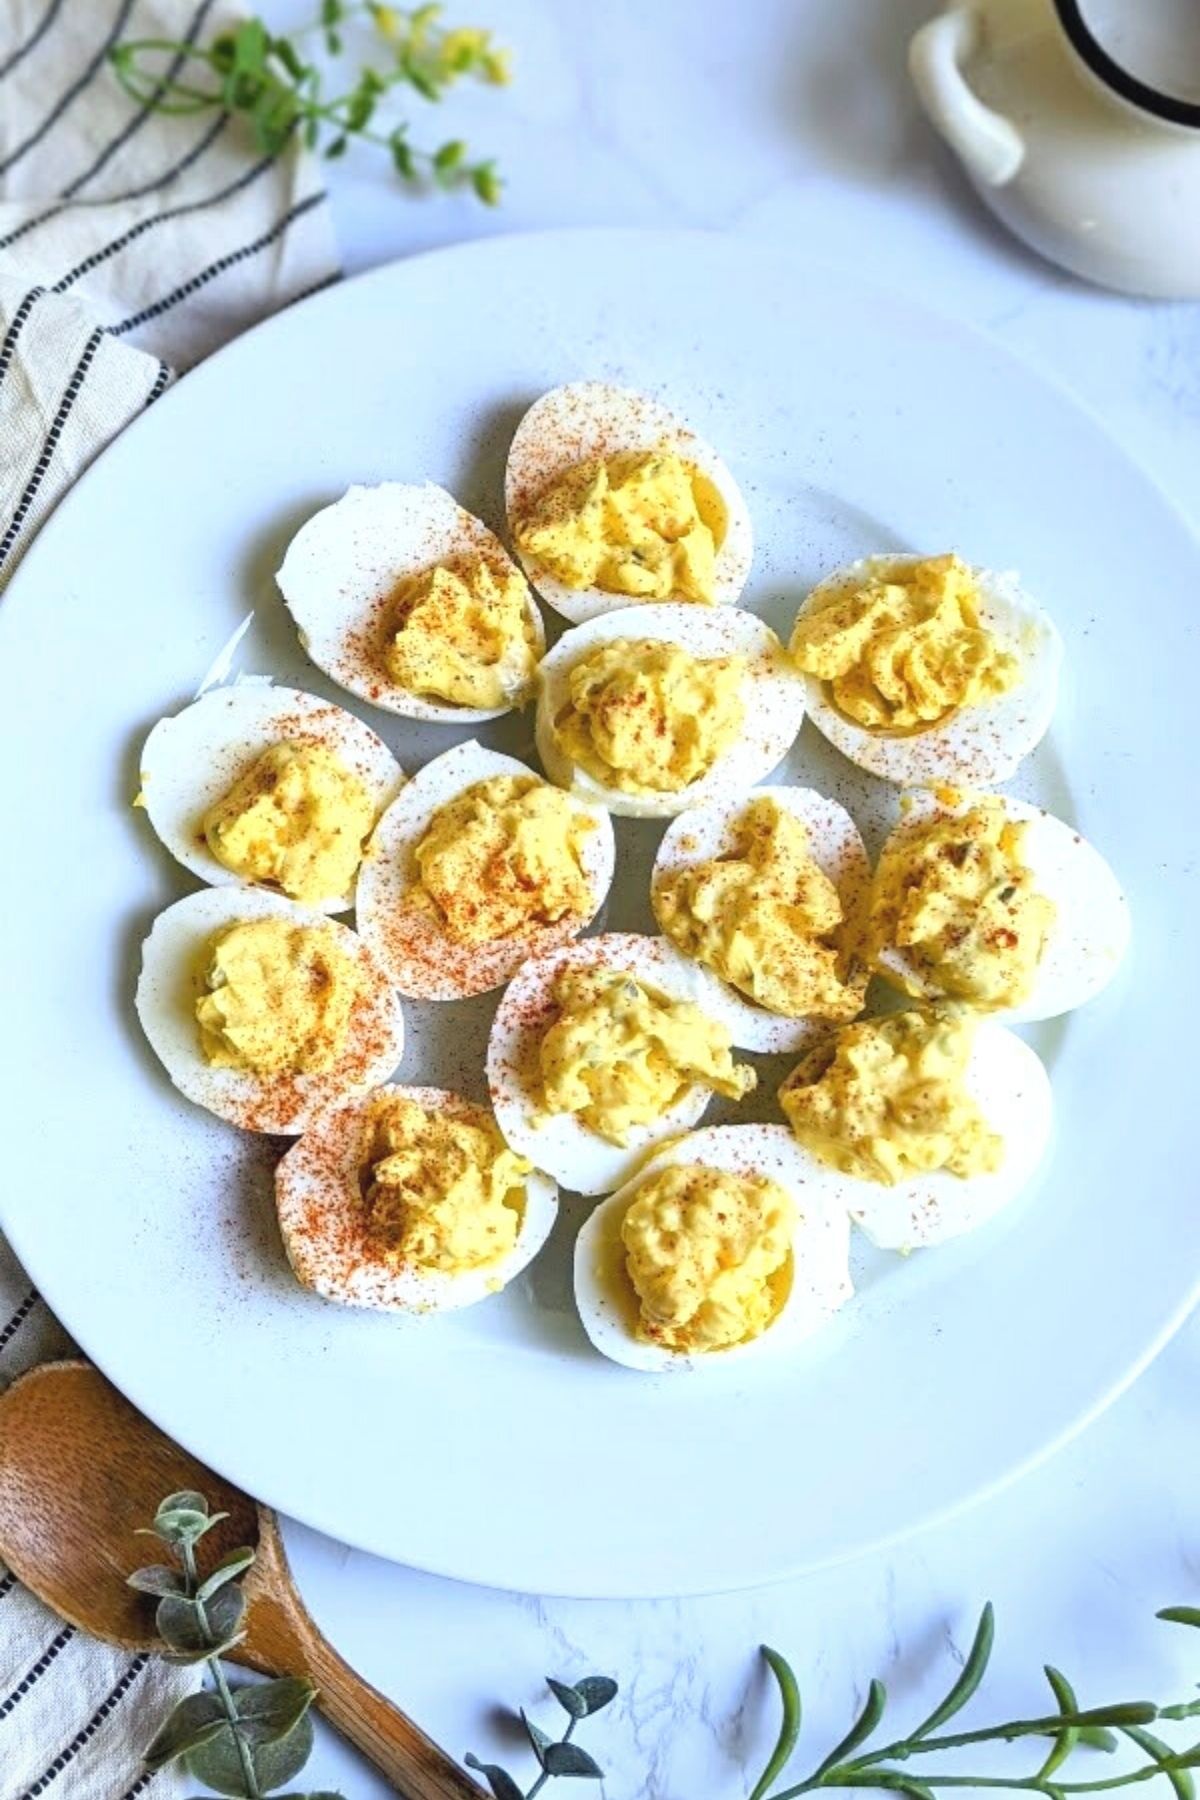 deviled eggs no salt easy low sodium party appetizers healthy egg appetizers without salt recipe low sodium vegetarian snacks